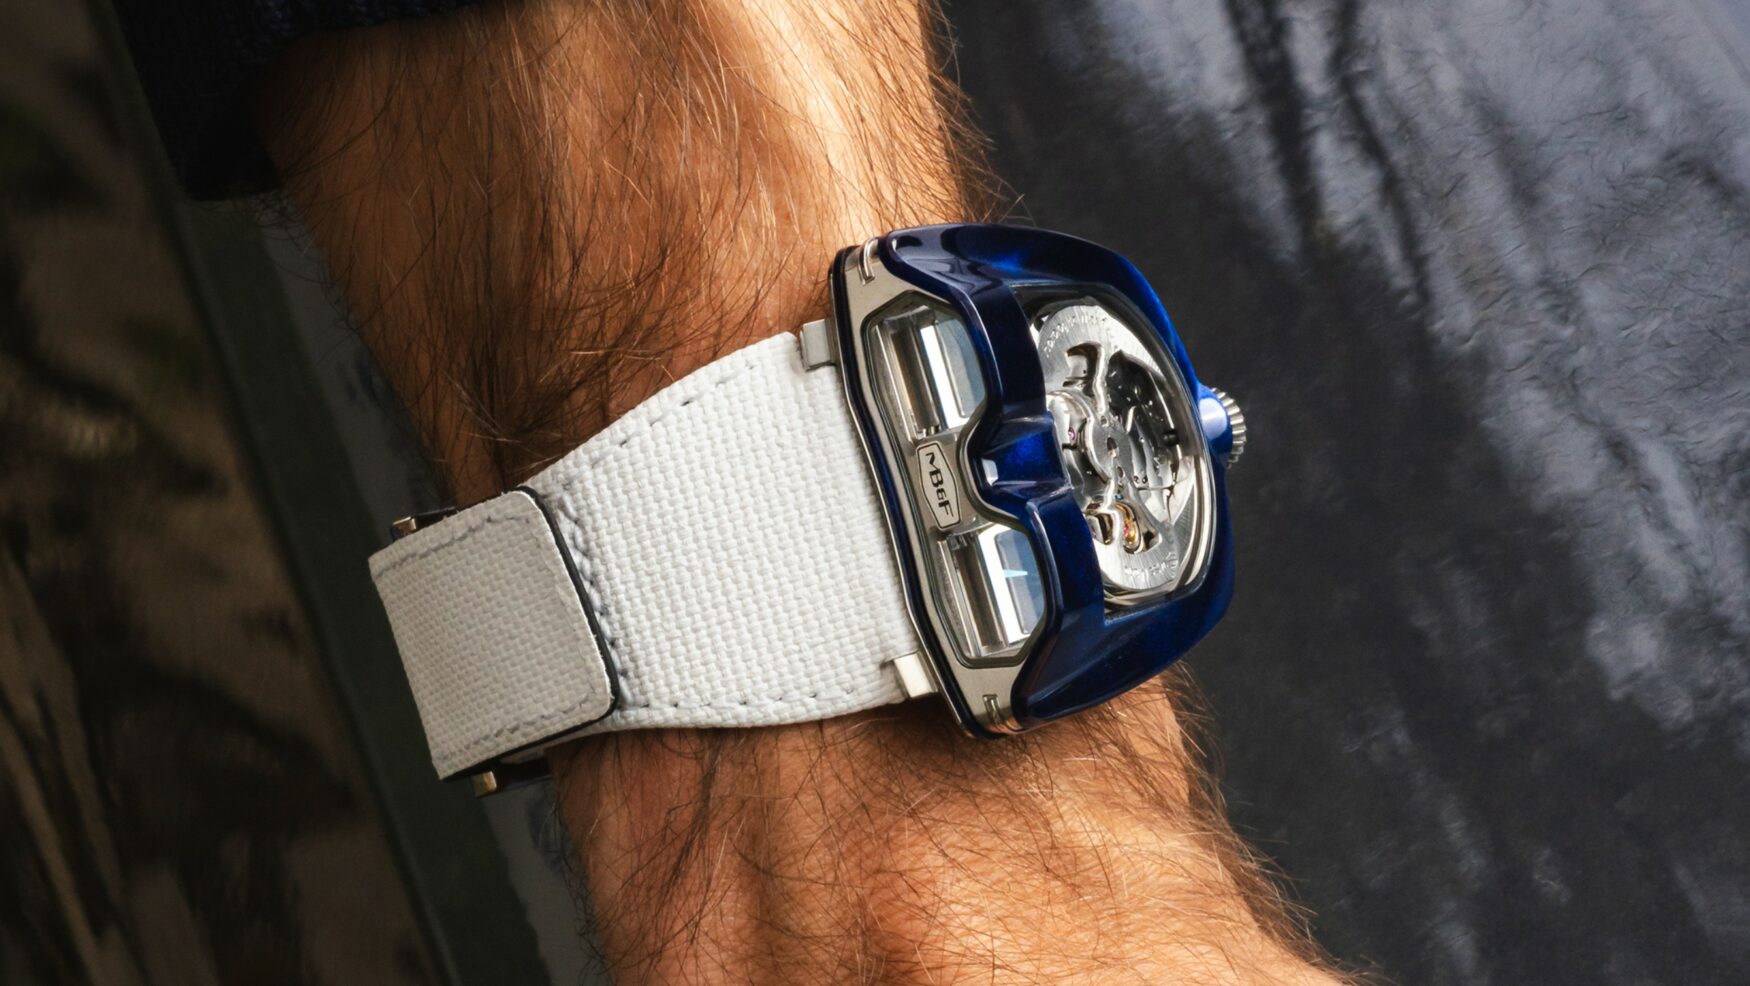 MB&F adds a striking metallic hue to the HM8 Mark 2 Blue